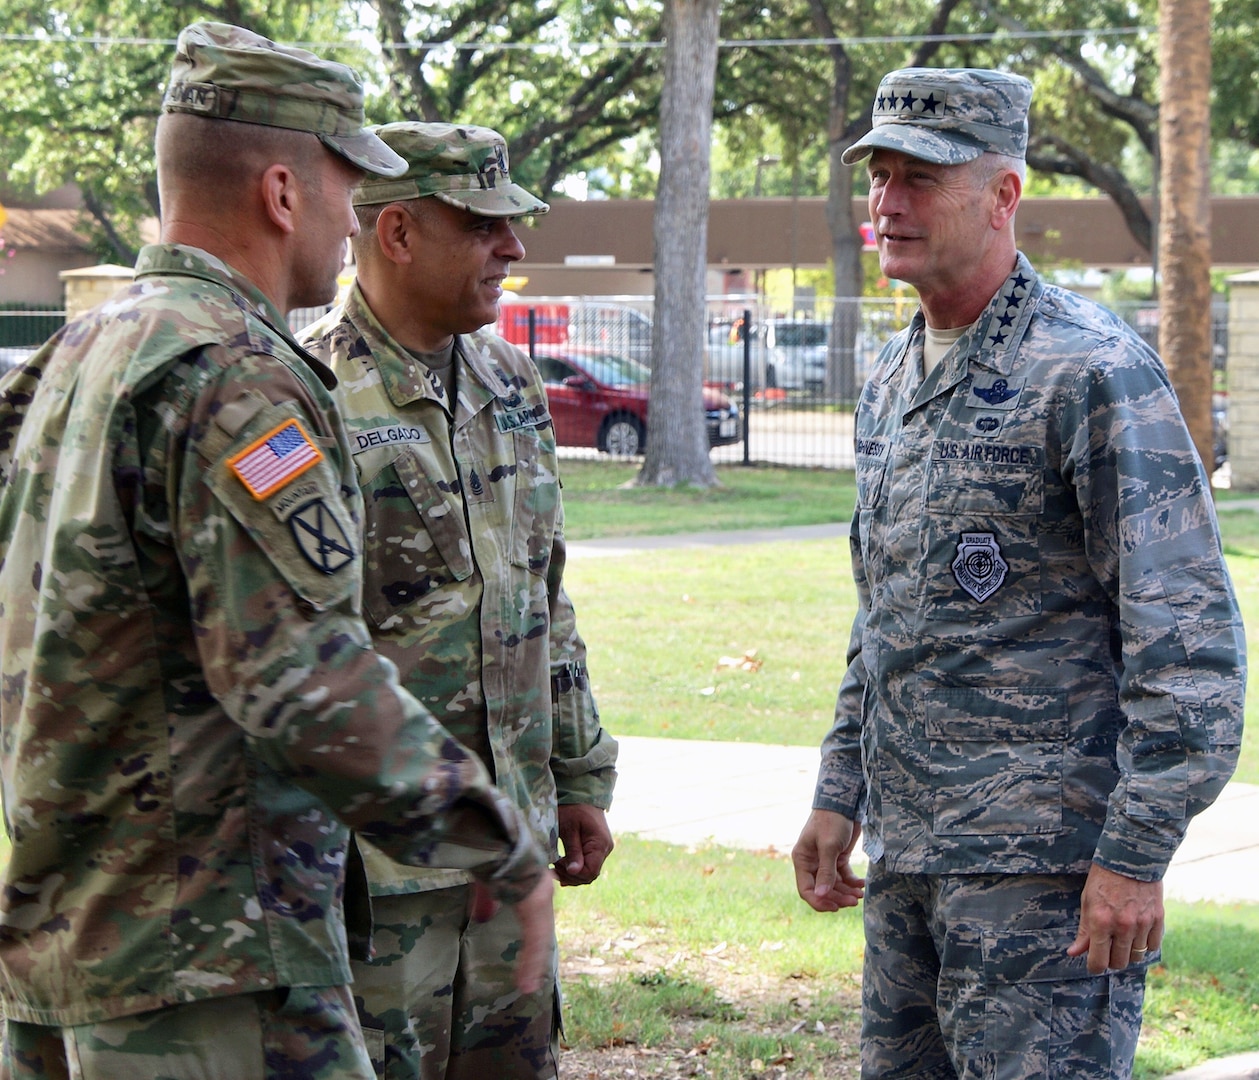 Air Force Gen. Terrence O'Shaughnessy (right), commanding general, North American Aerospace Defense Command and U.S. Northern Command, is greeted by Lt. Gen. Jeffrey Buchanan (left), commanding general, U.S. Army North, and Command Sgt. Maj. Alberto Delgado (center), ARNORTH senior enlisted leader, at Joint Base San Antonio-Fort Sam Houston’s historic Quadrangle during a visit July 17.